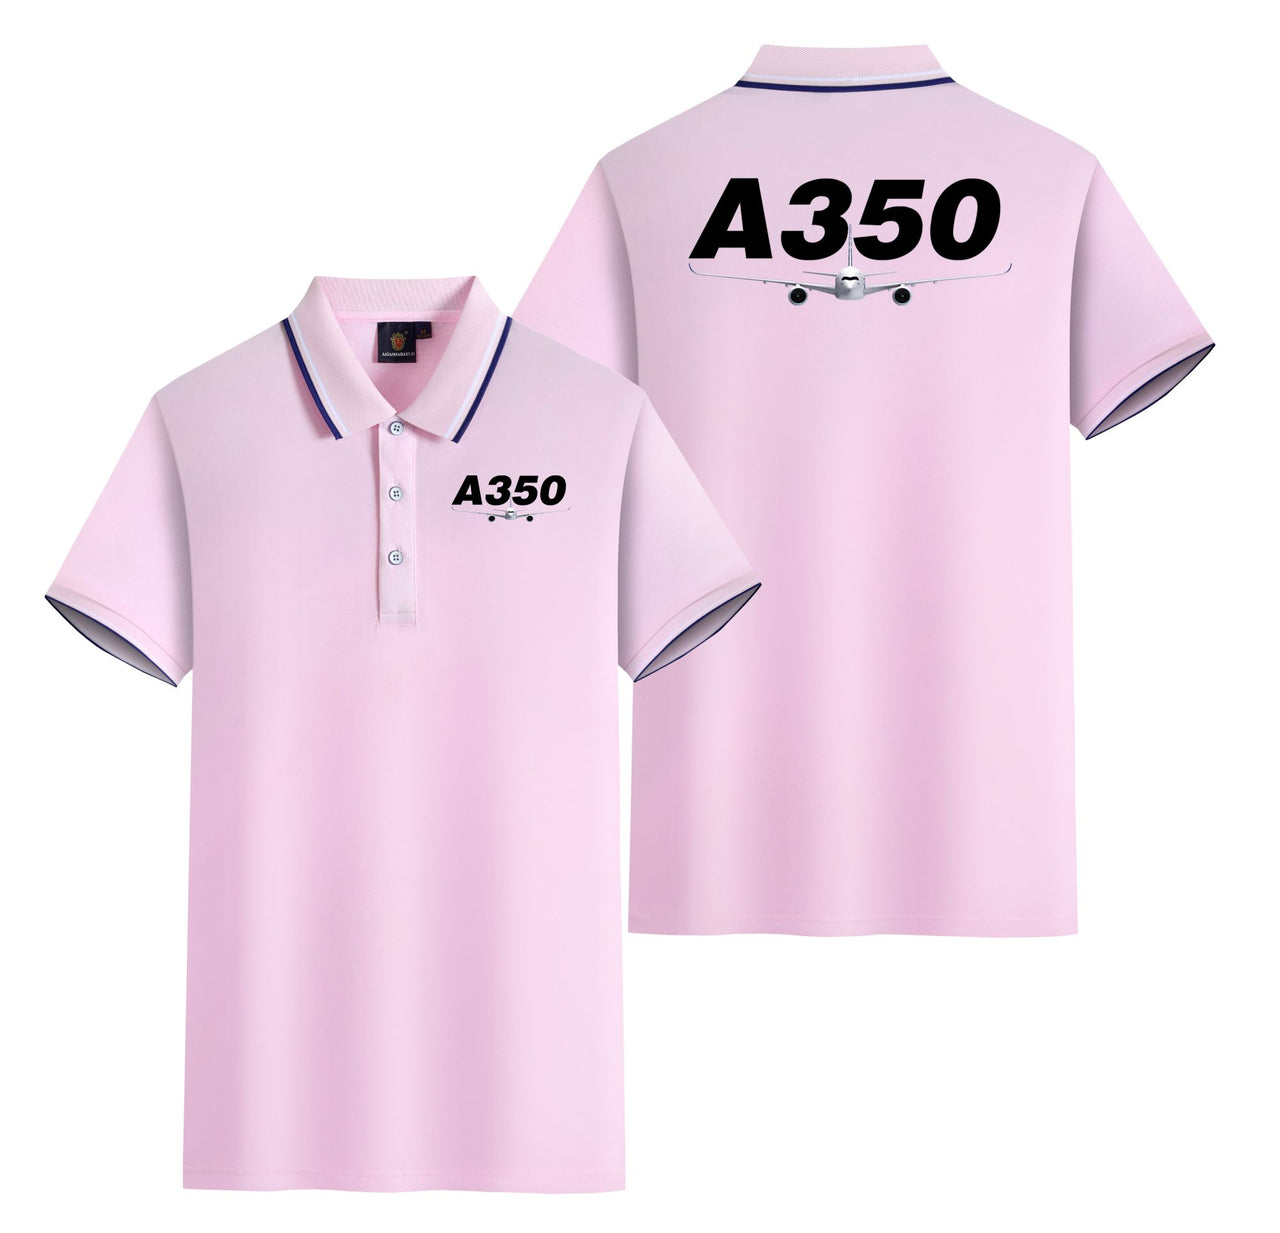 Super Airbus A350 Designed Stylish Polo T-Shirts (Double-Side)